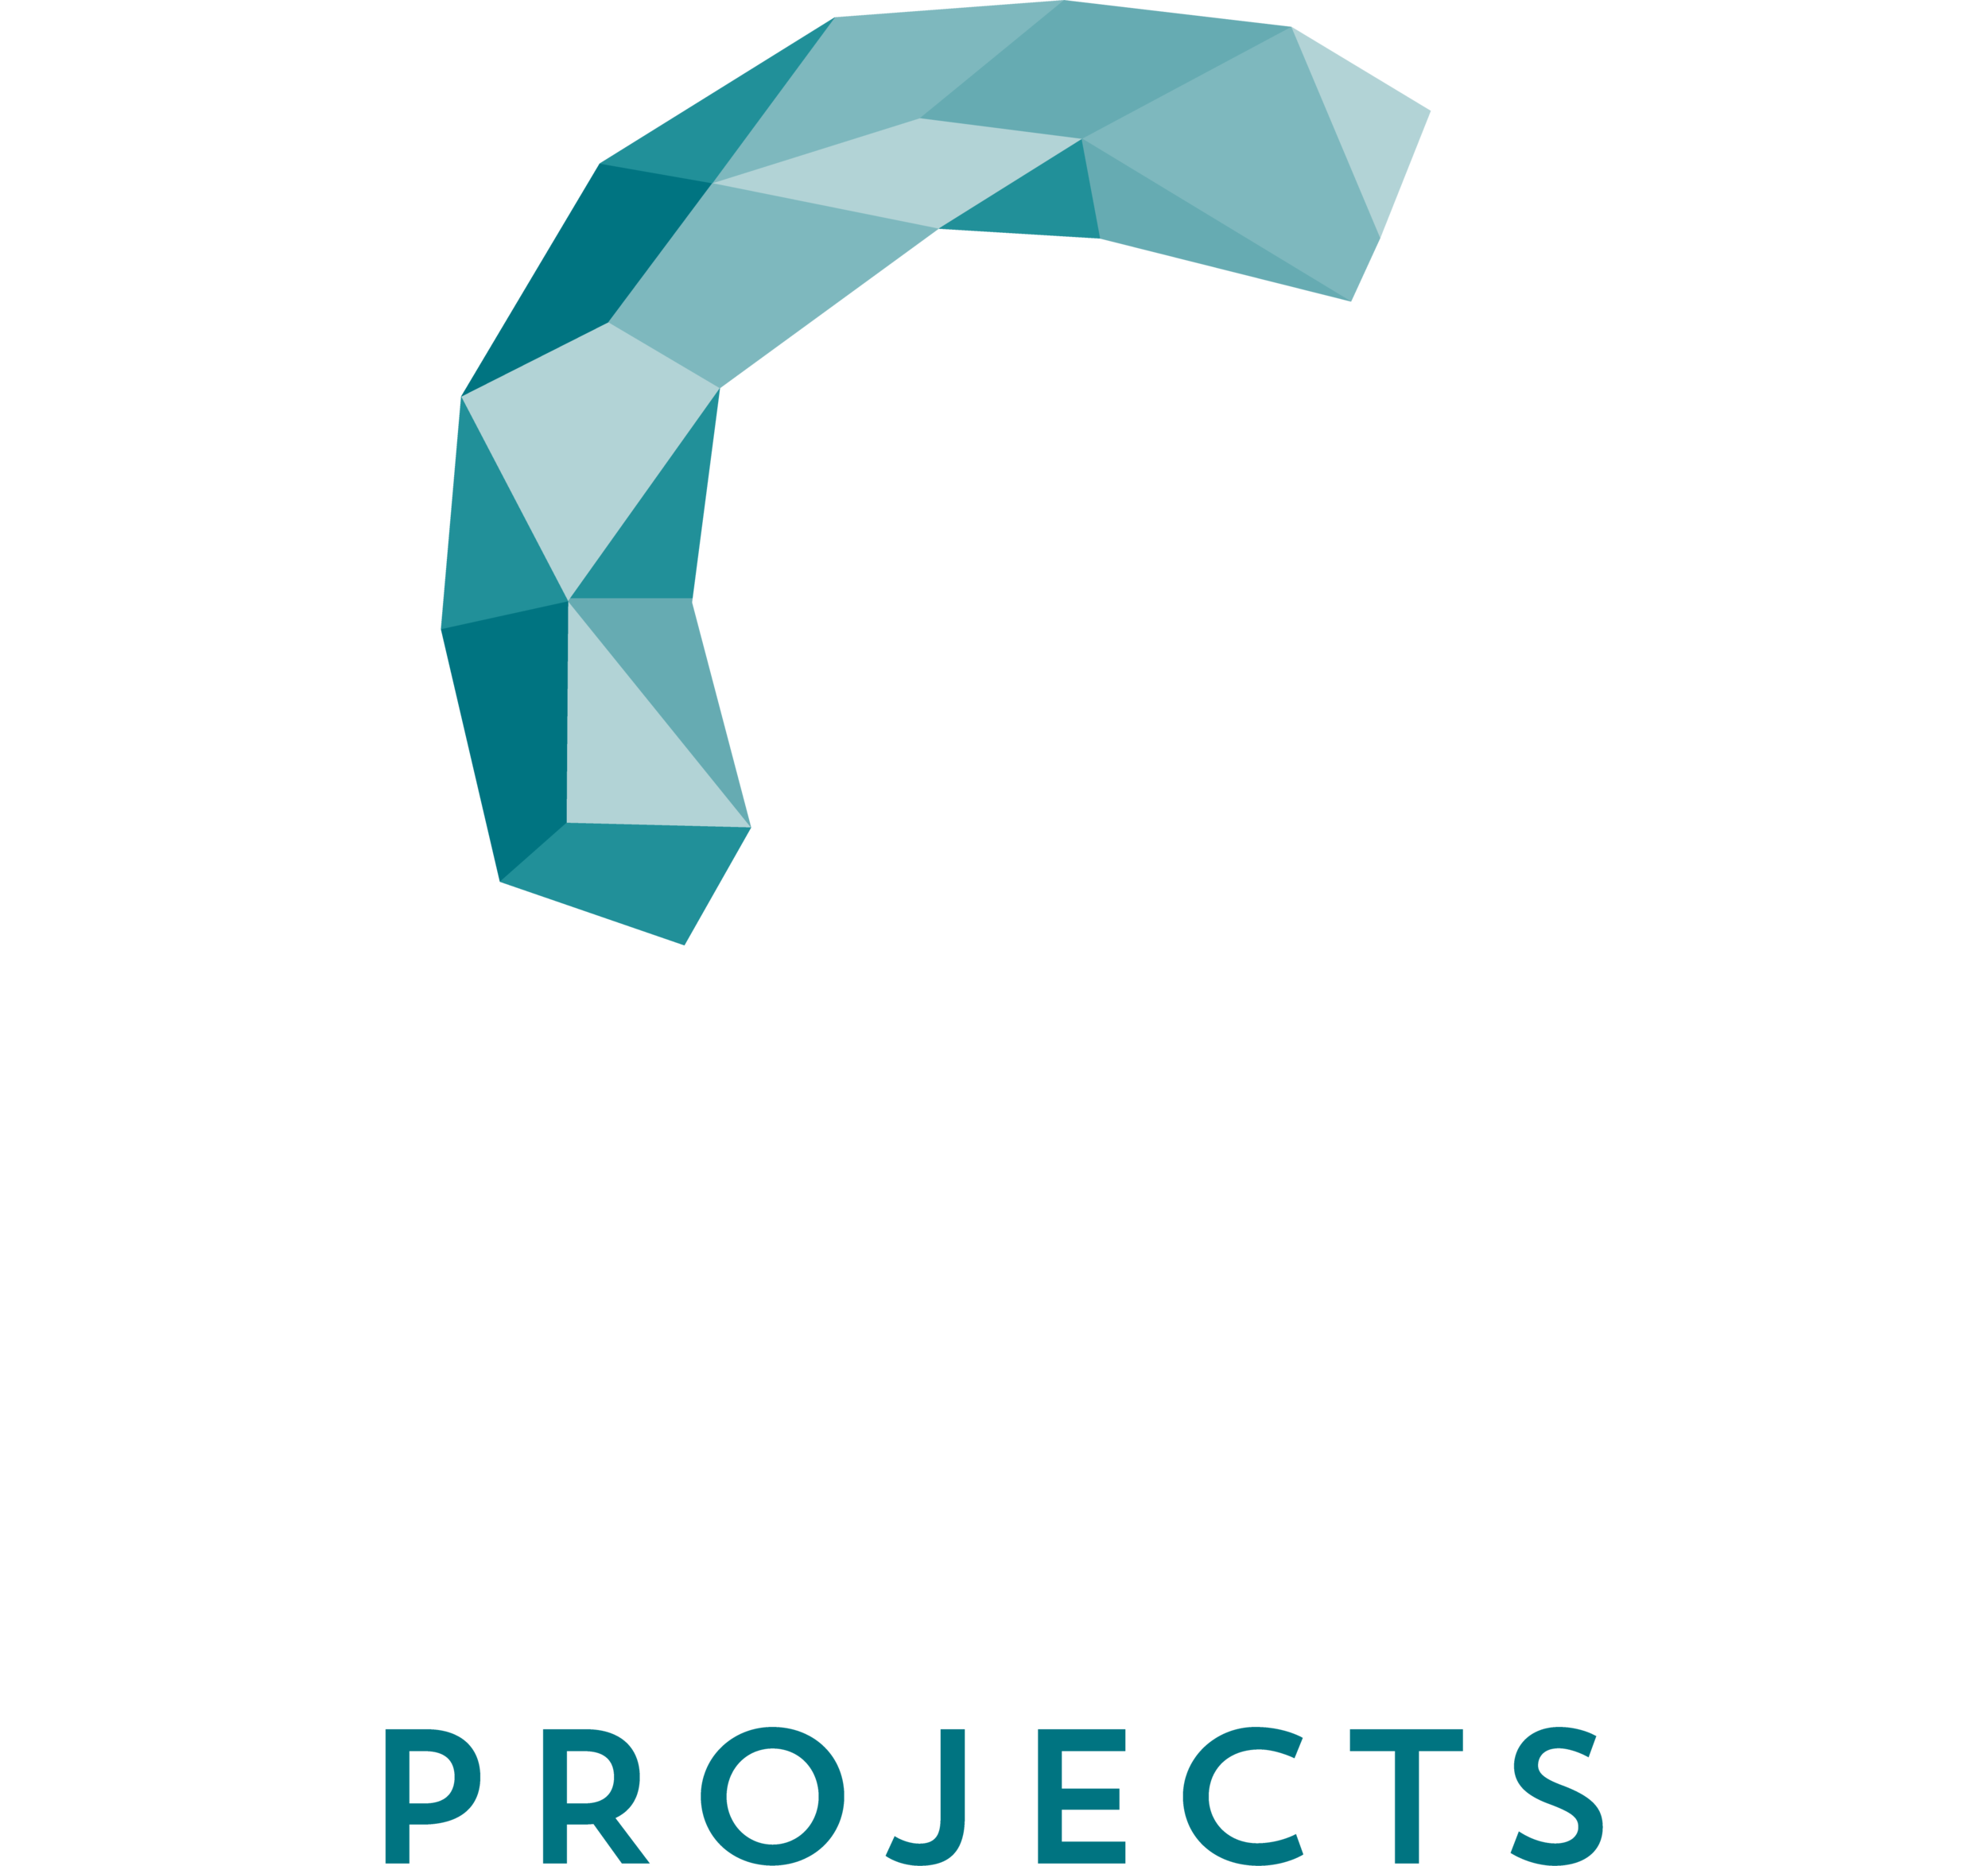 Giovenco Projects